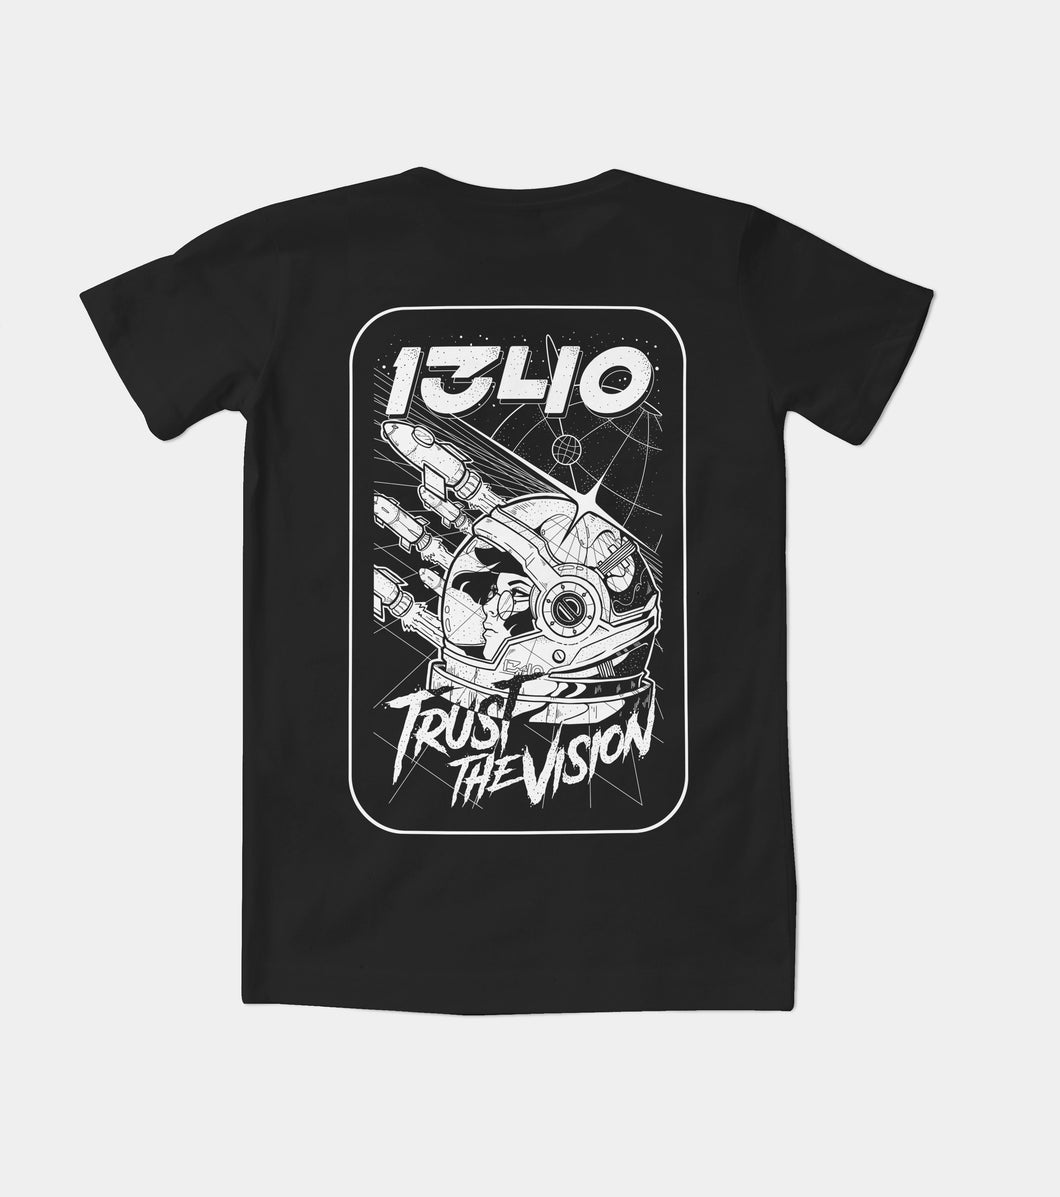 1340 SPACE T-SHIRT